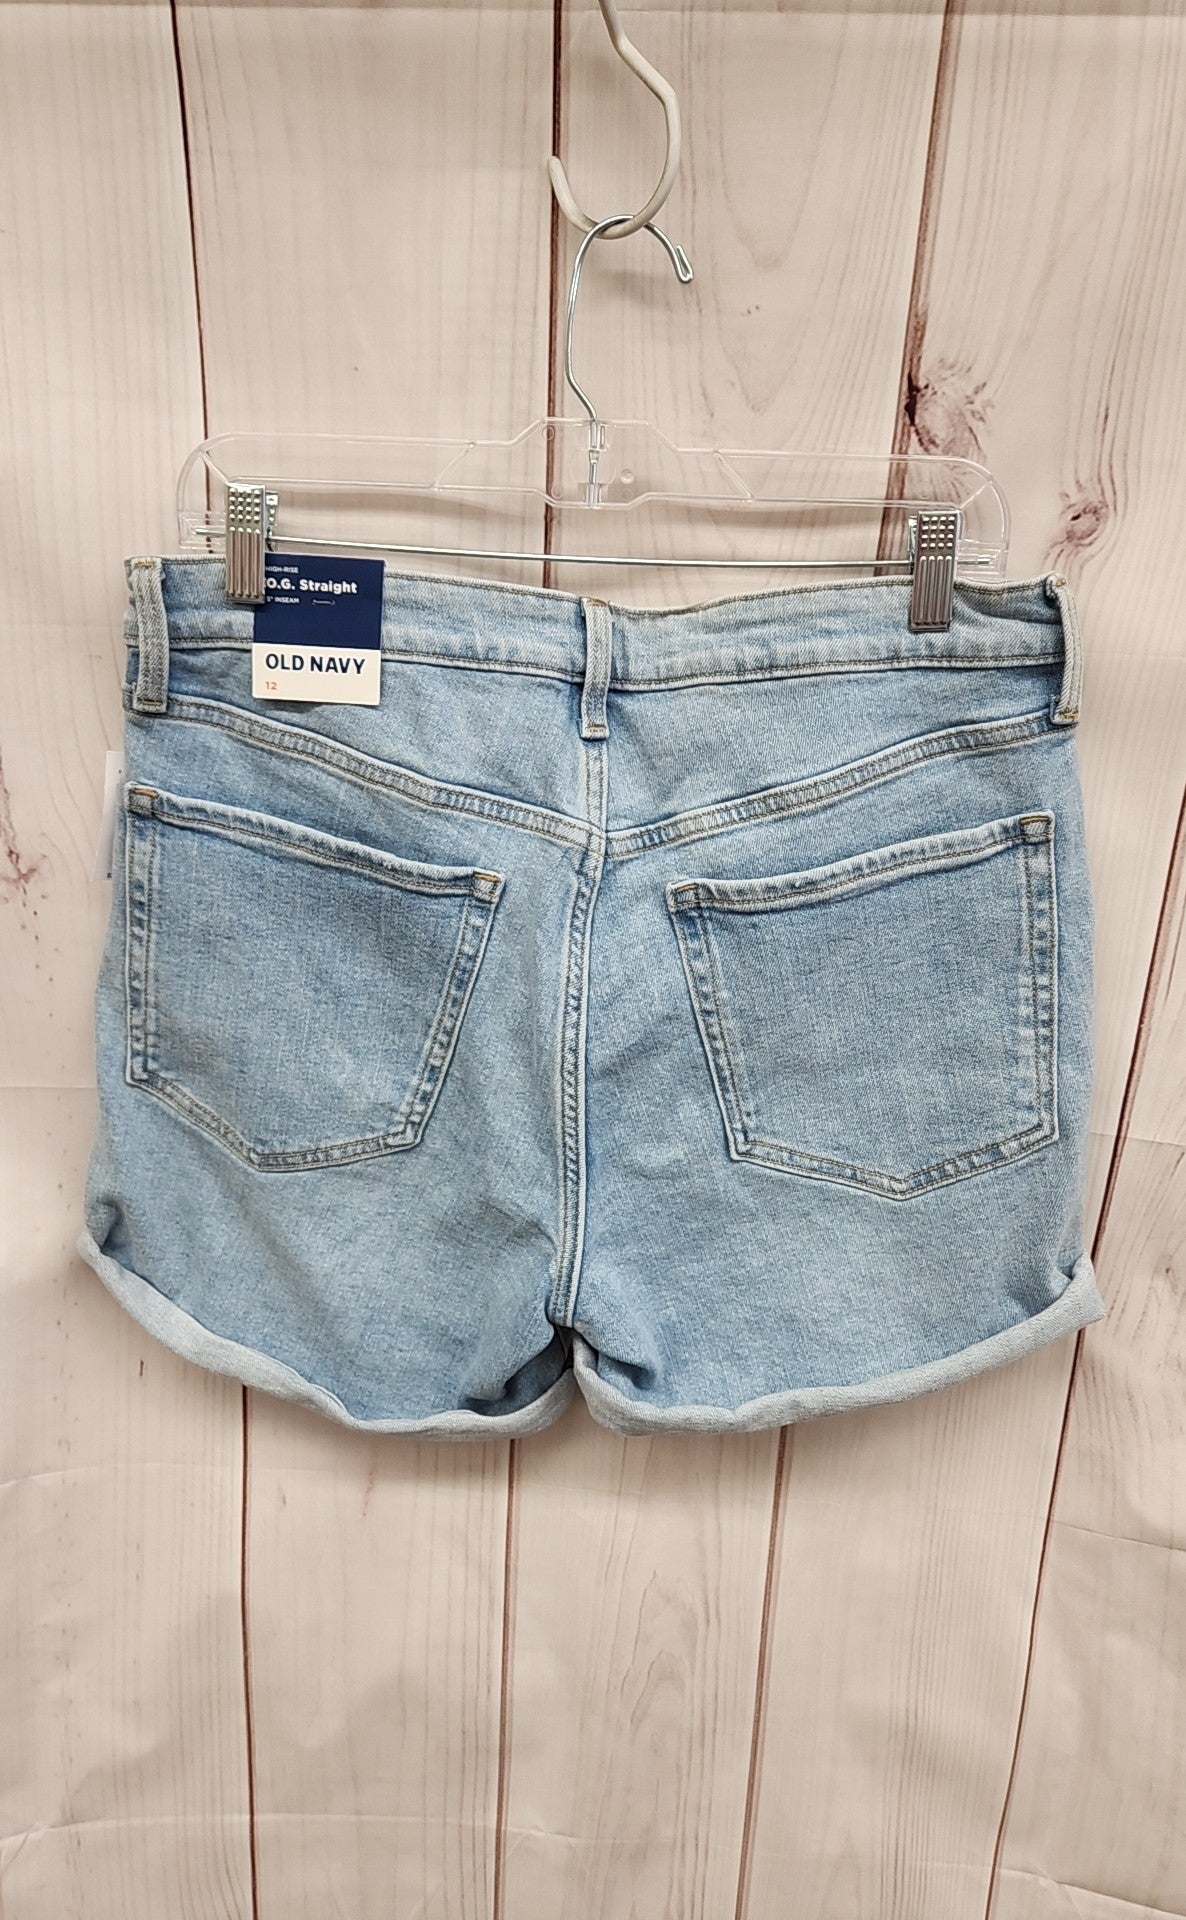 Old Navy Women's Size 12 Blue Shorts NWT